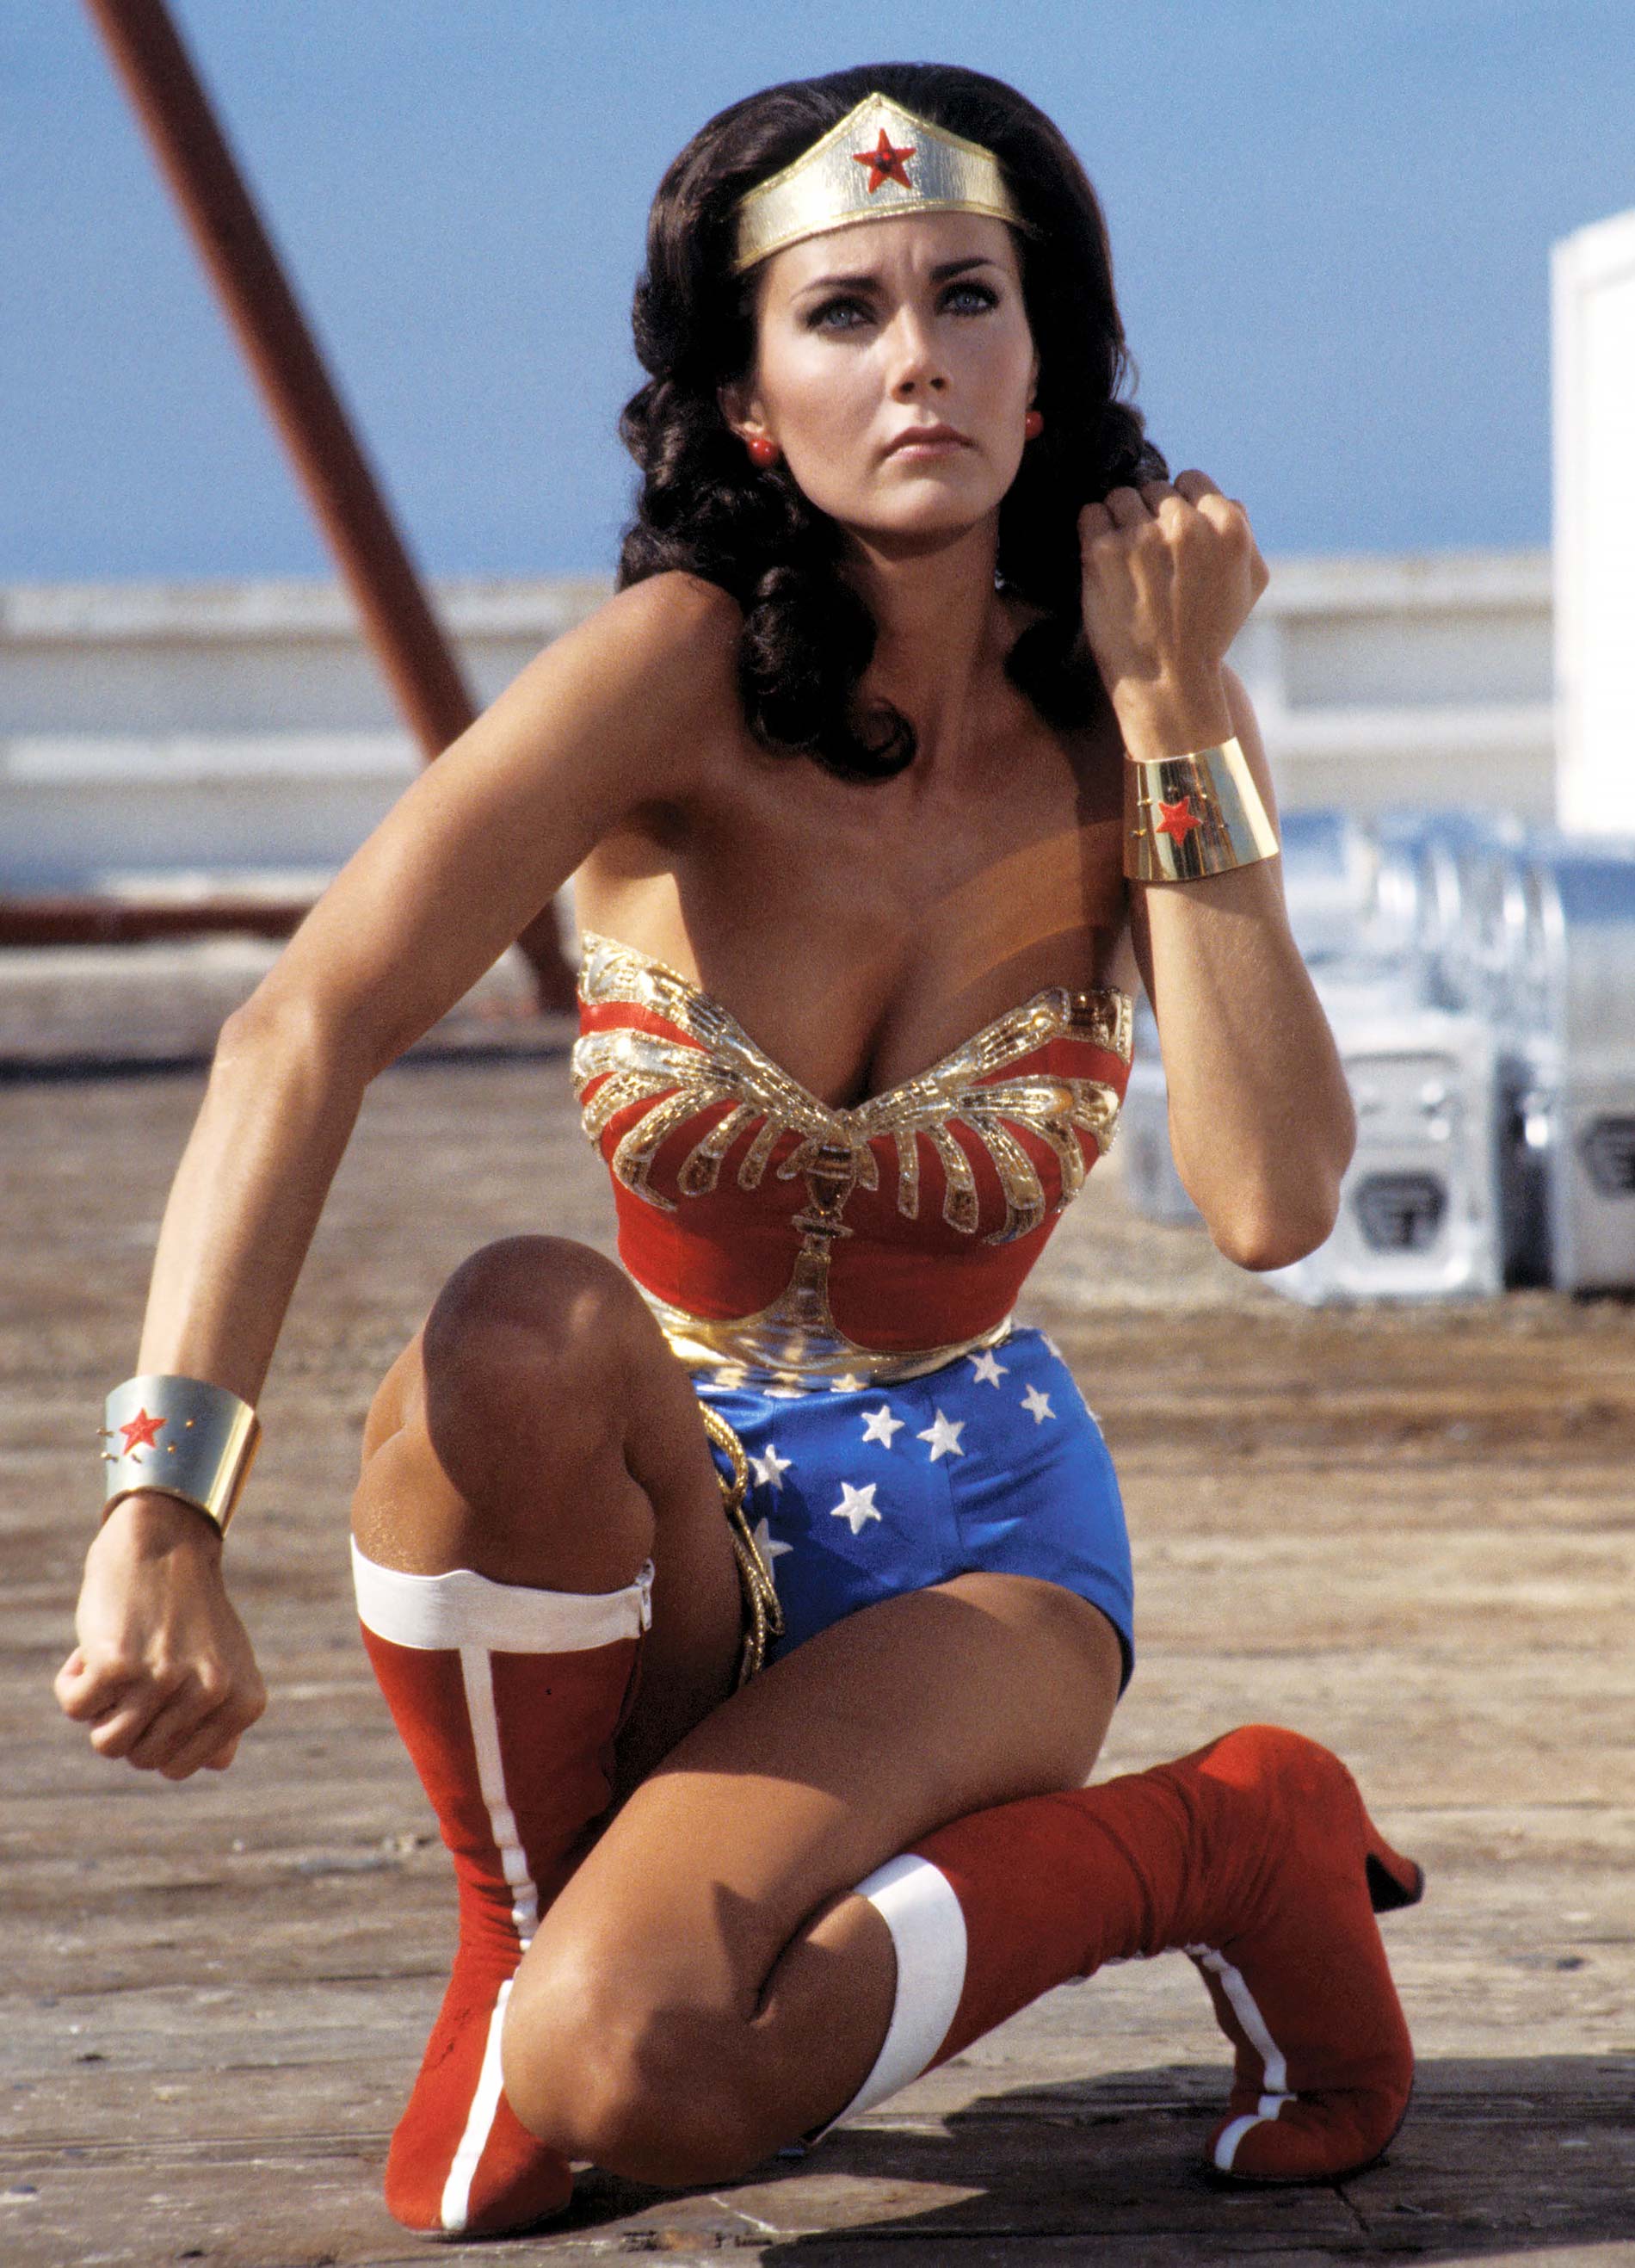 Original Wonder Woman Lynda Carter looks out of this world as she